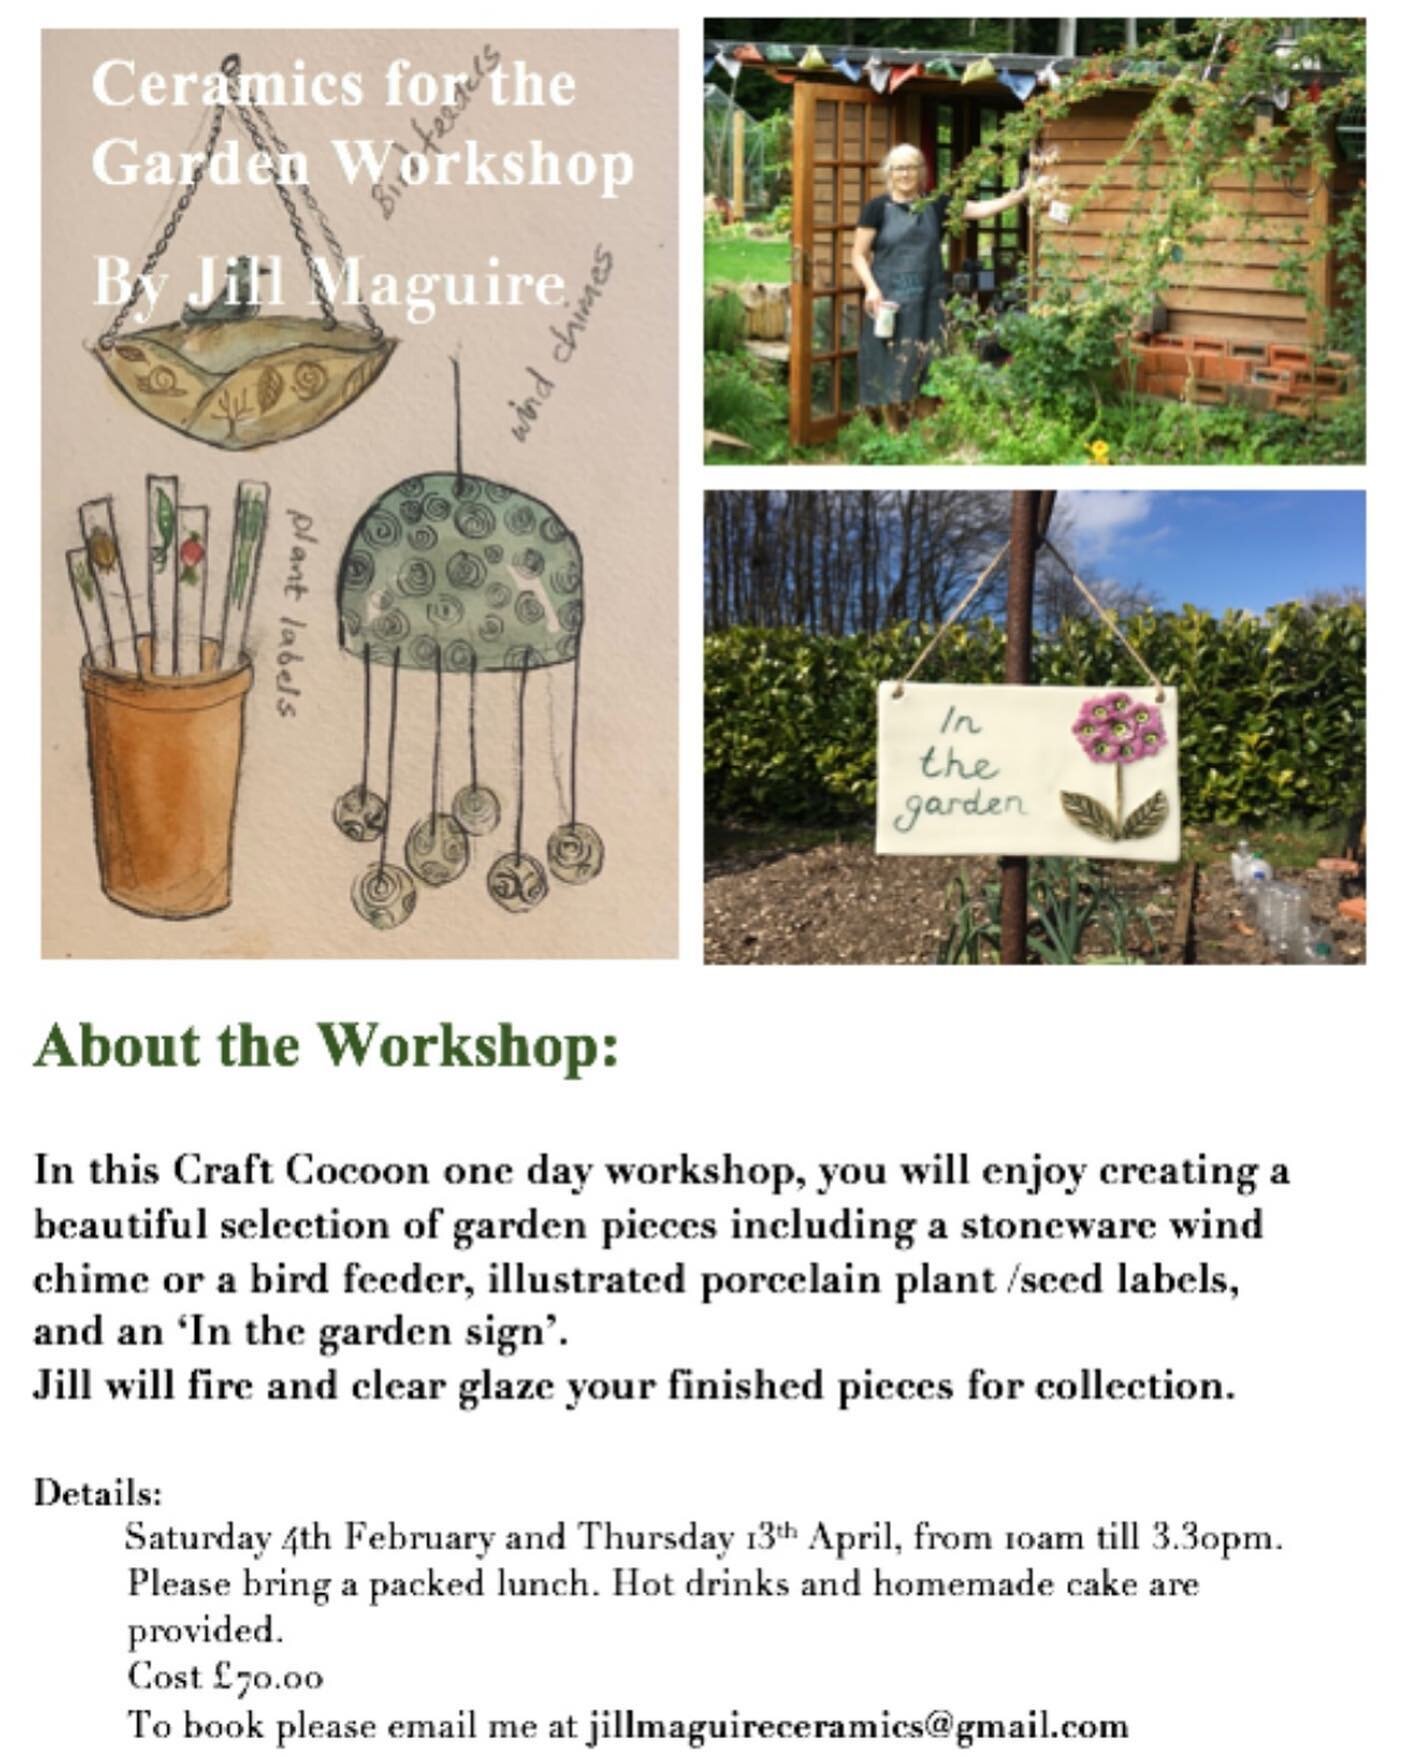 There are a couple of spaces left for the Garden Themed workshop at the Craft Cocoon on 13th April. Please message me if you would like to join us , now that Spring has finally arrived and we can finally get into our gardens again I&rsquo;m feeling r